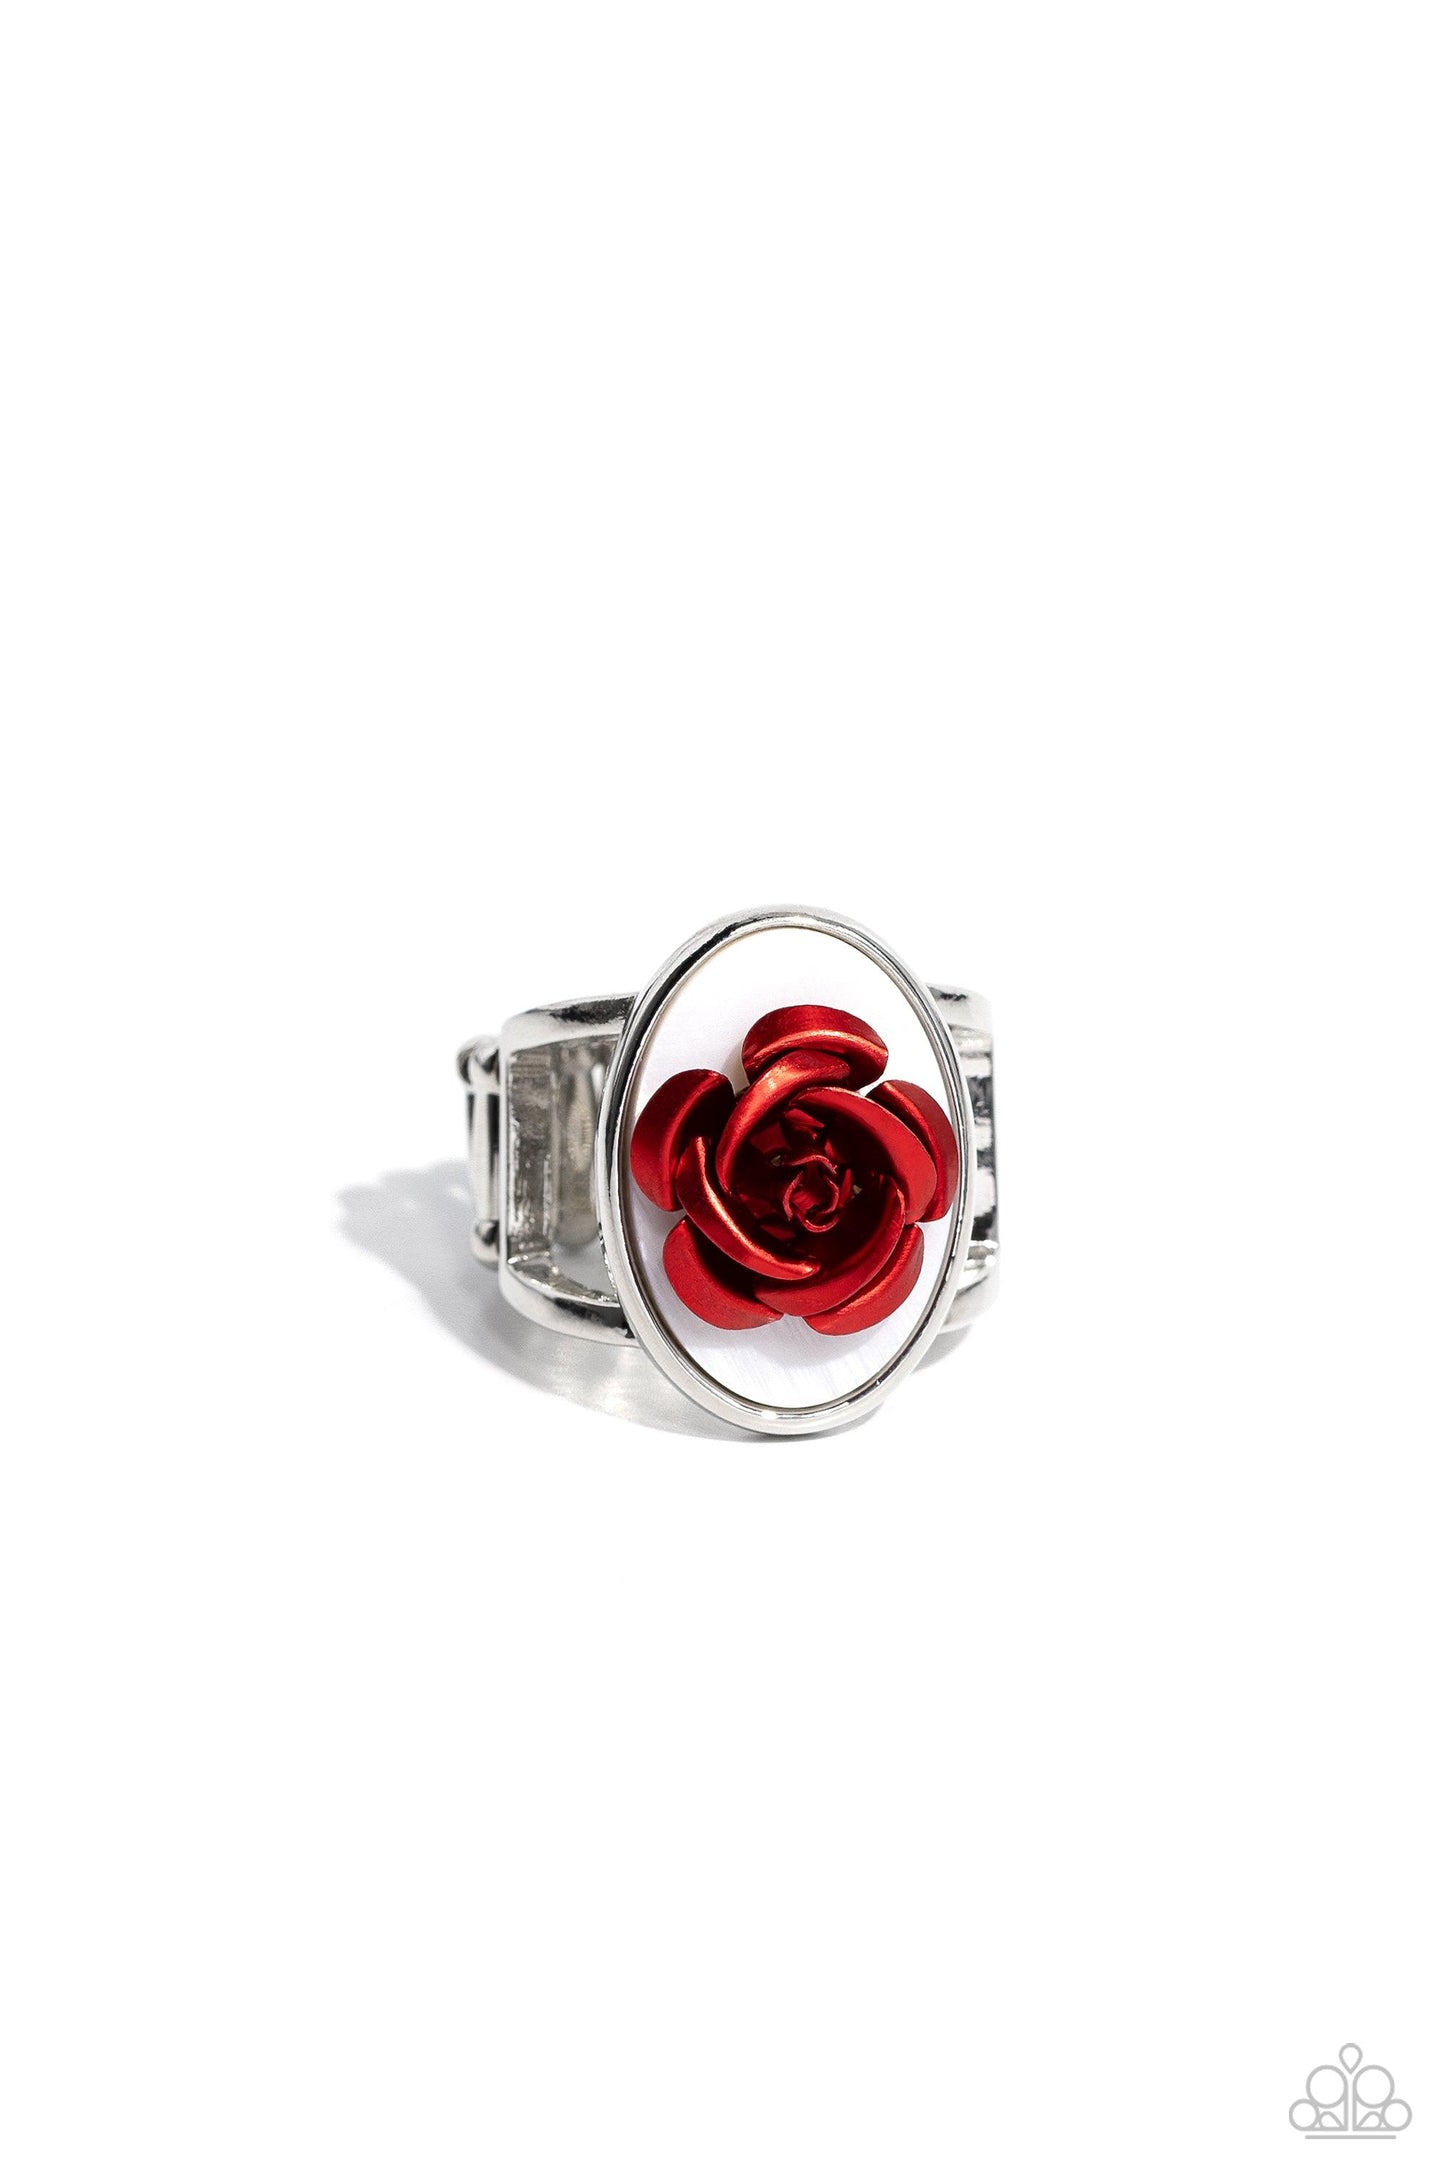 Paparazzi Accessories - ROSE to My Heart - Red Ring - Bling by JessieK